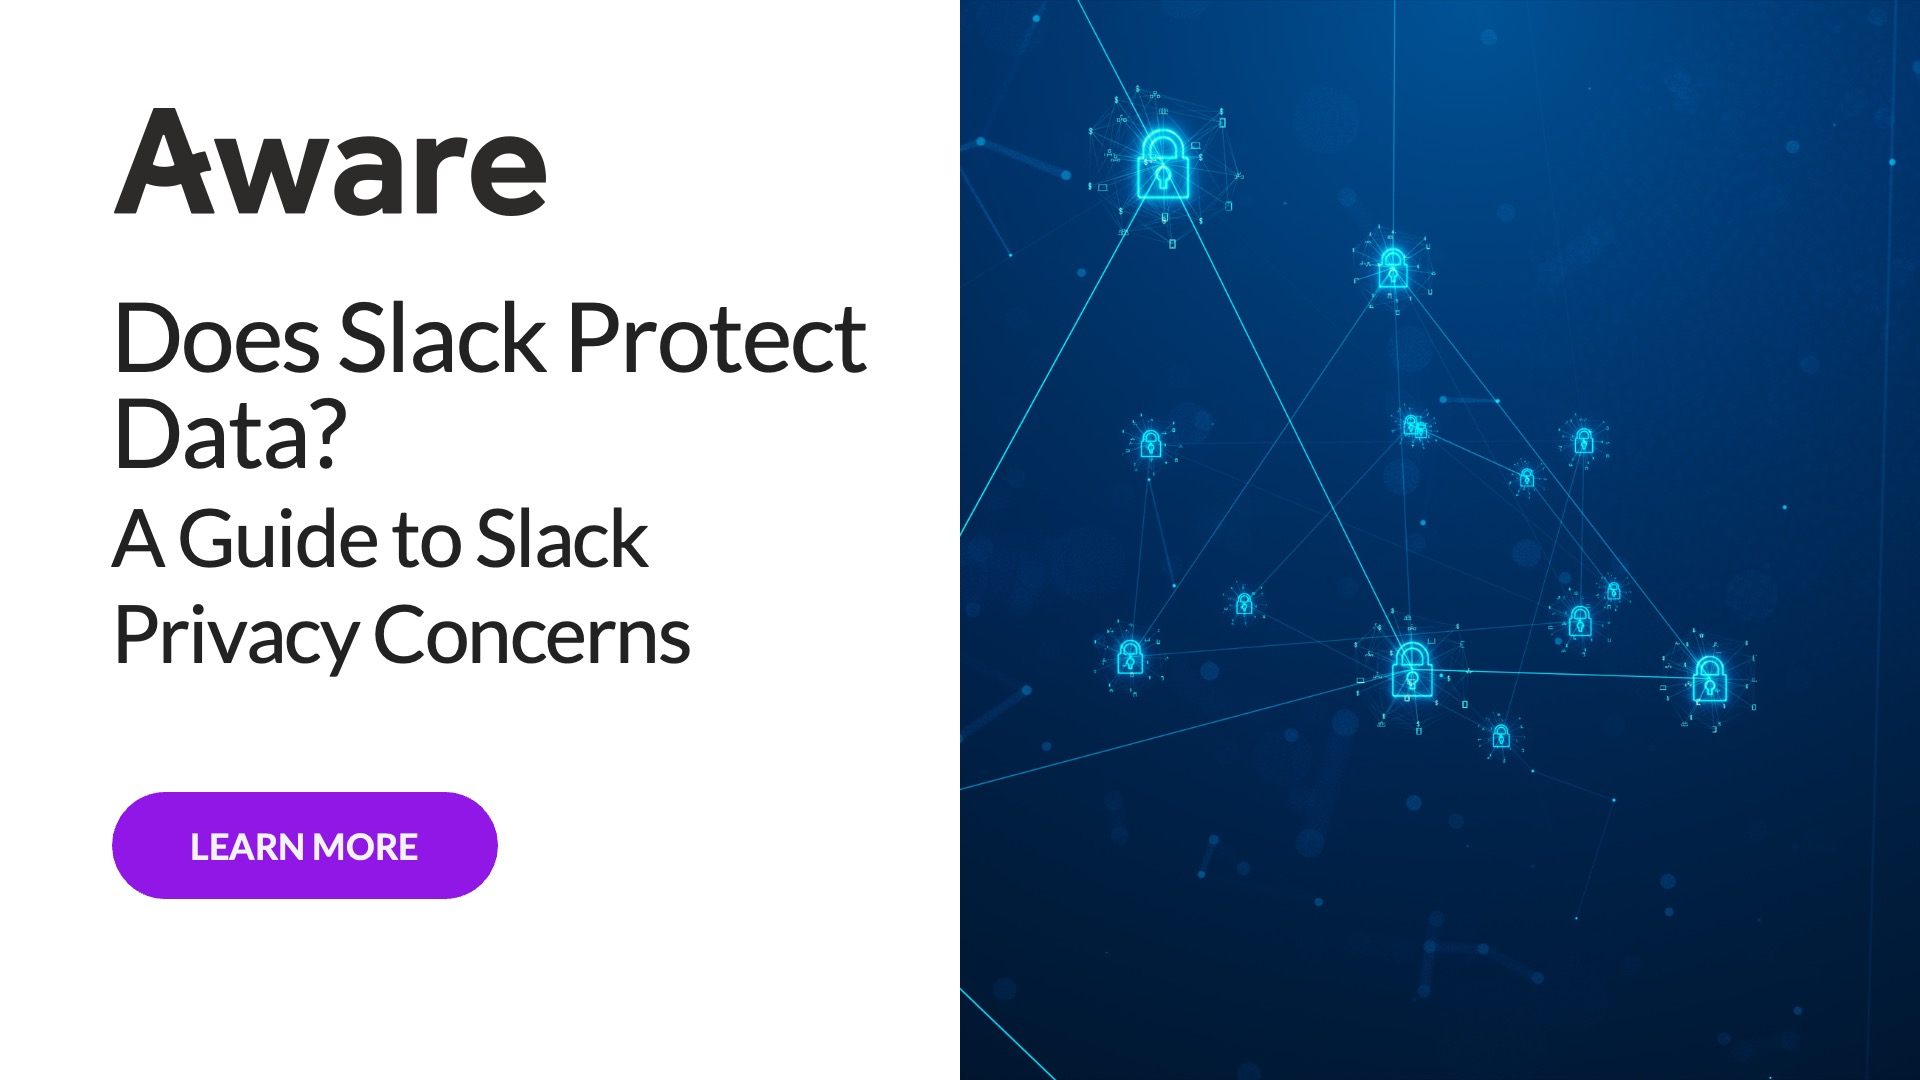 Does Slack Protect Data? A Guide to Slack Privacy Concerns